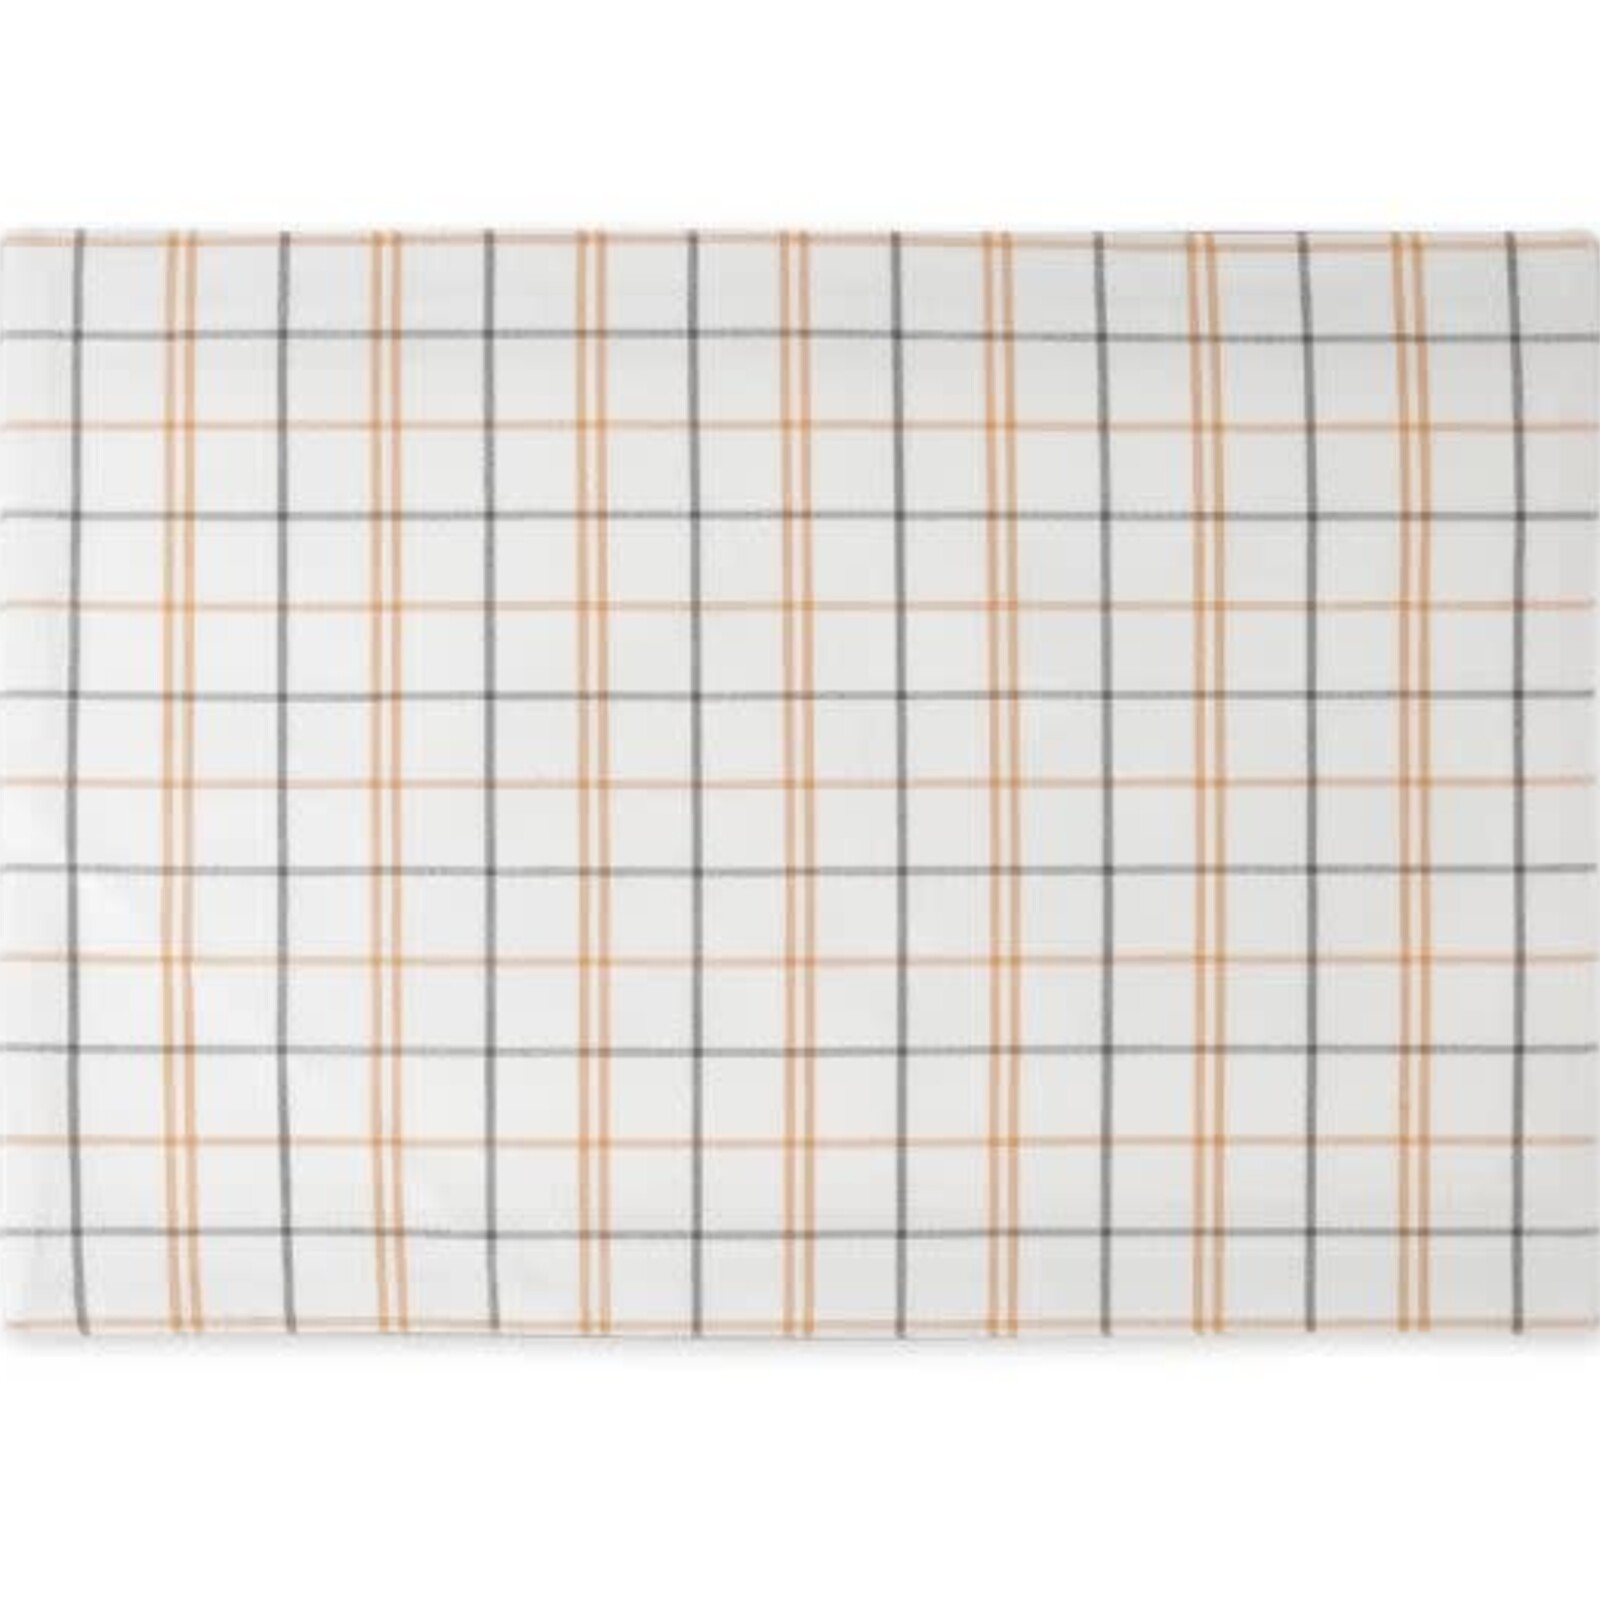 Design Imports DII Gingham & Floral Fall Placemat loading=